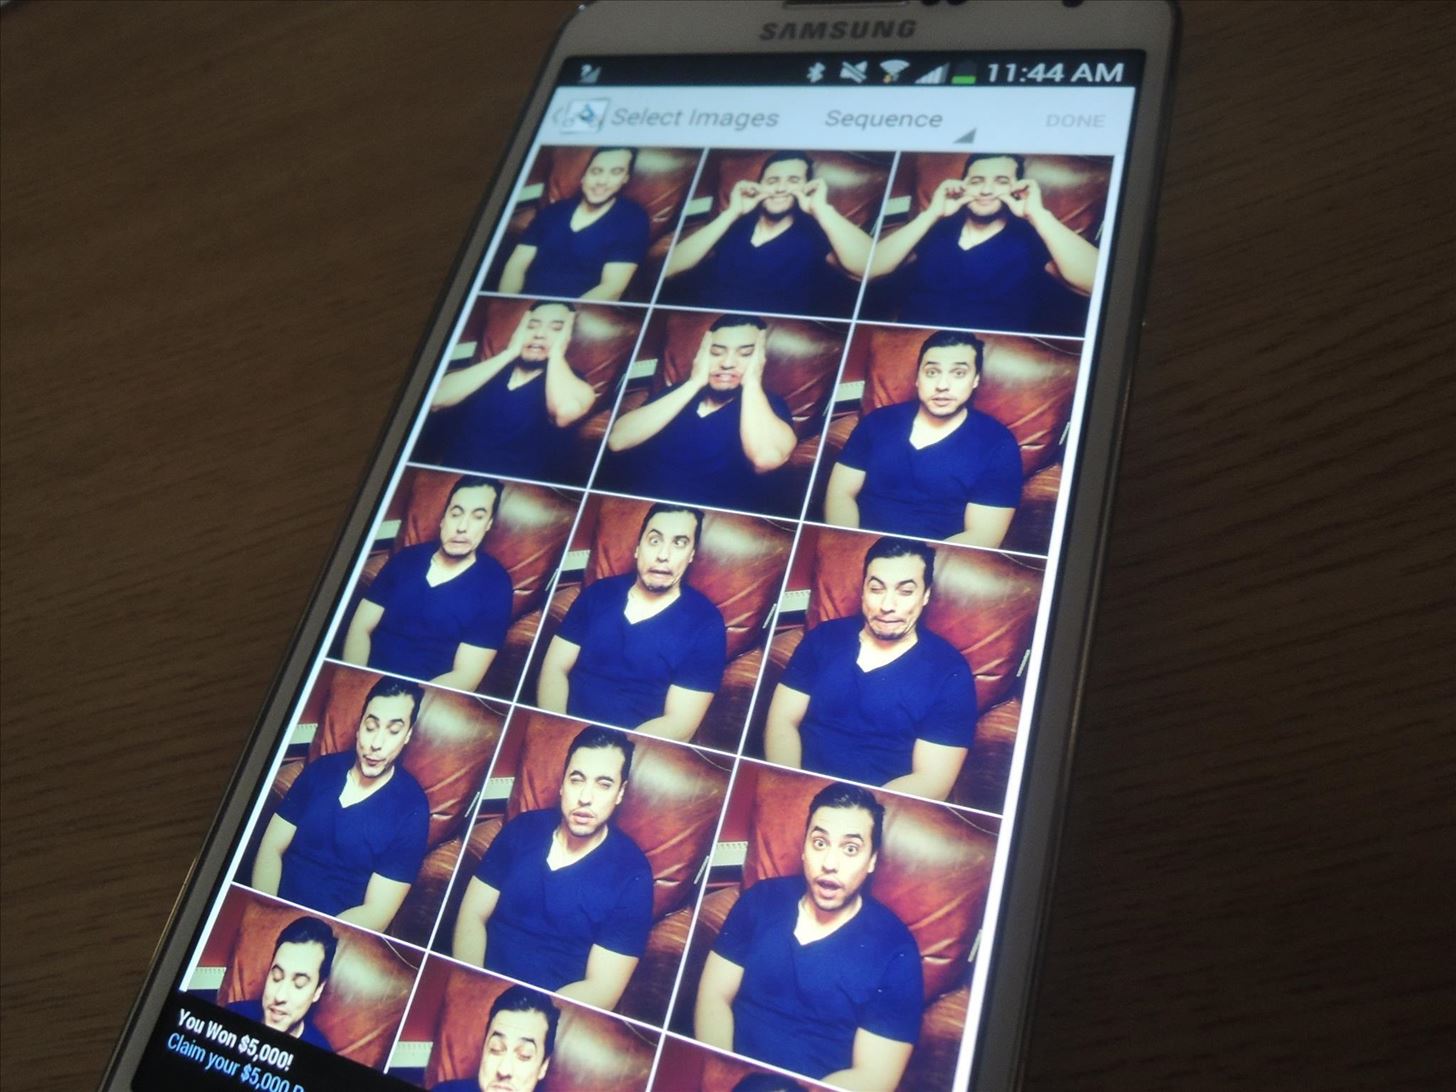 The Easiest and Fastest Way to Pick the Best Shot Out of Multiple Photos on Your Galaxy Note 3